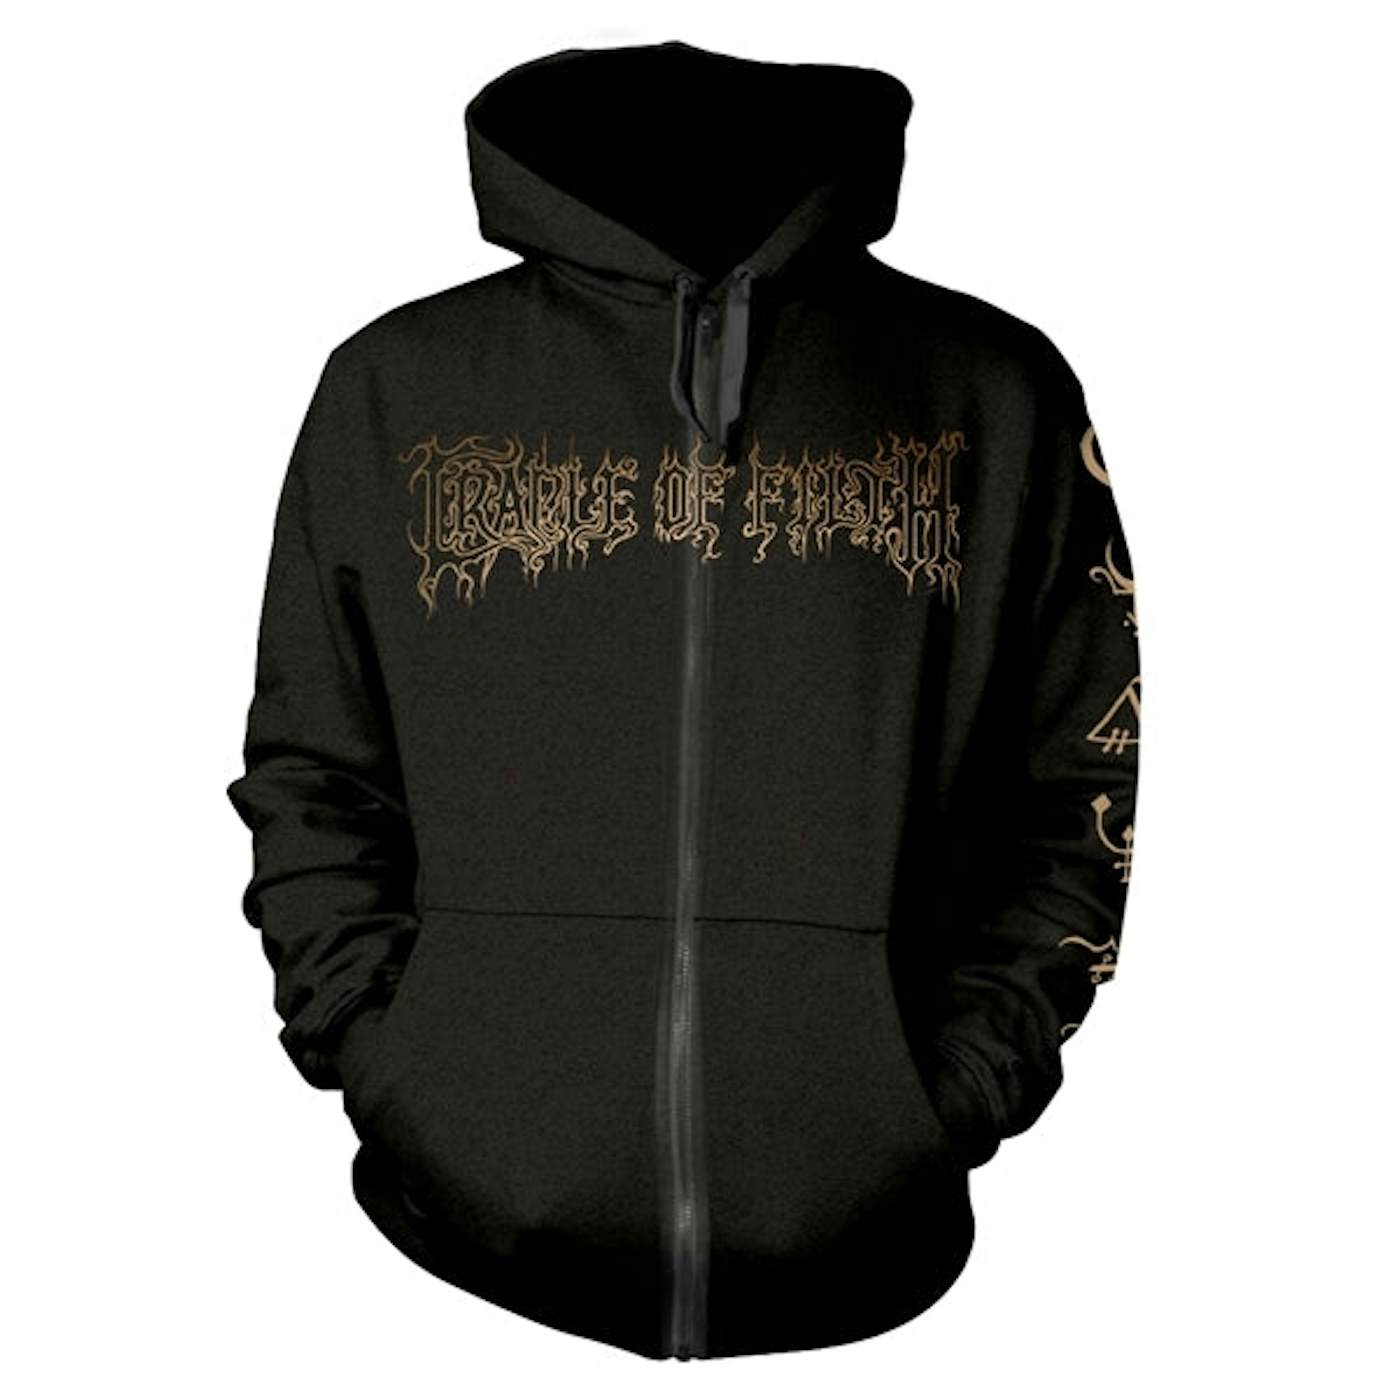 Cradle Of Filth Hoodie - Existence (All Existence)